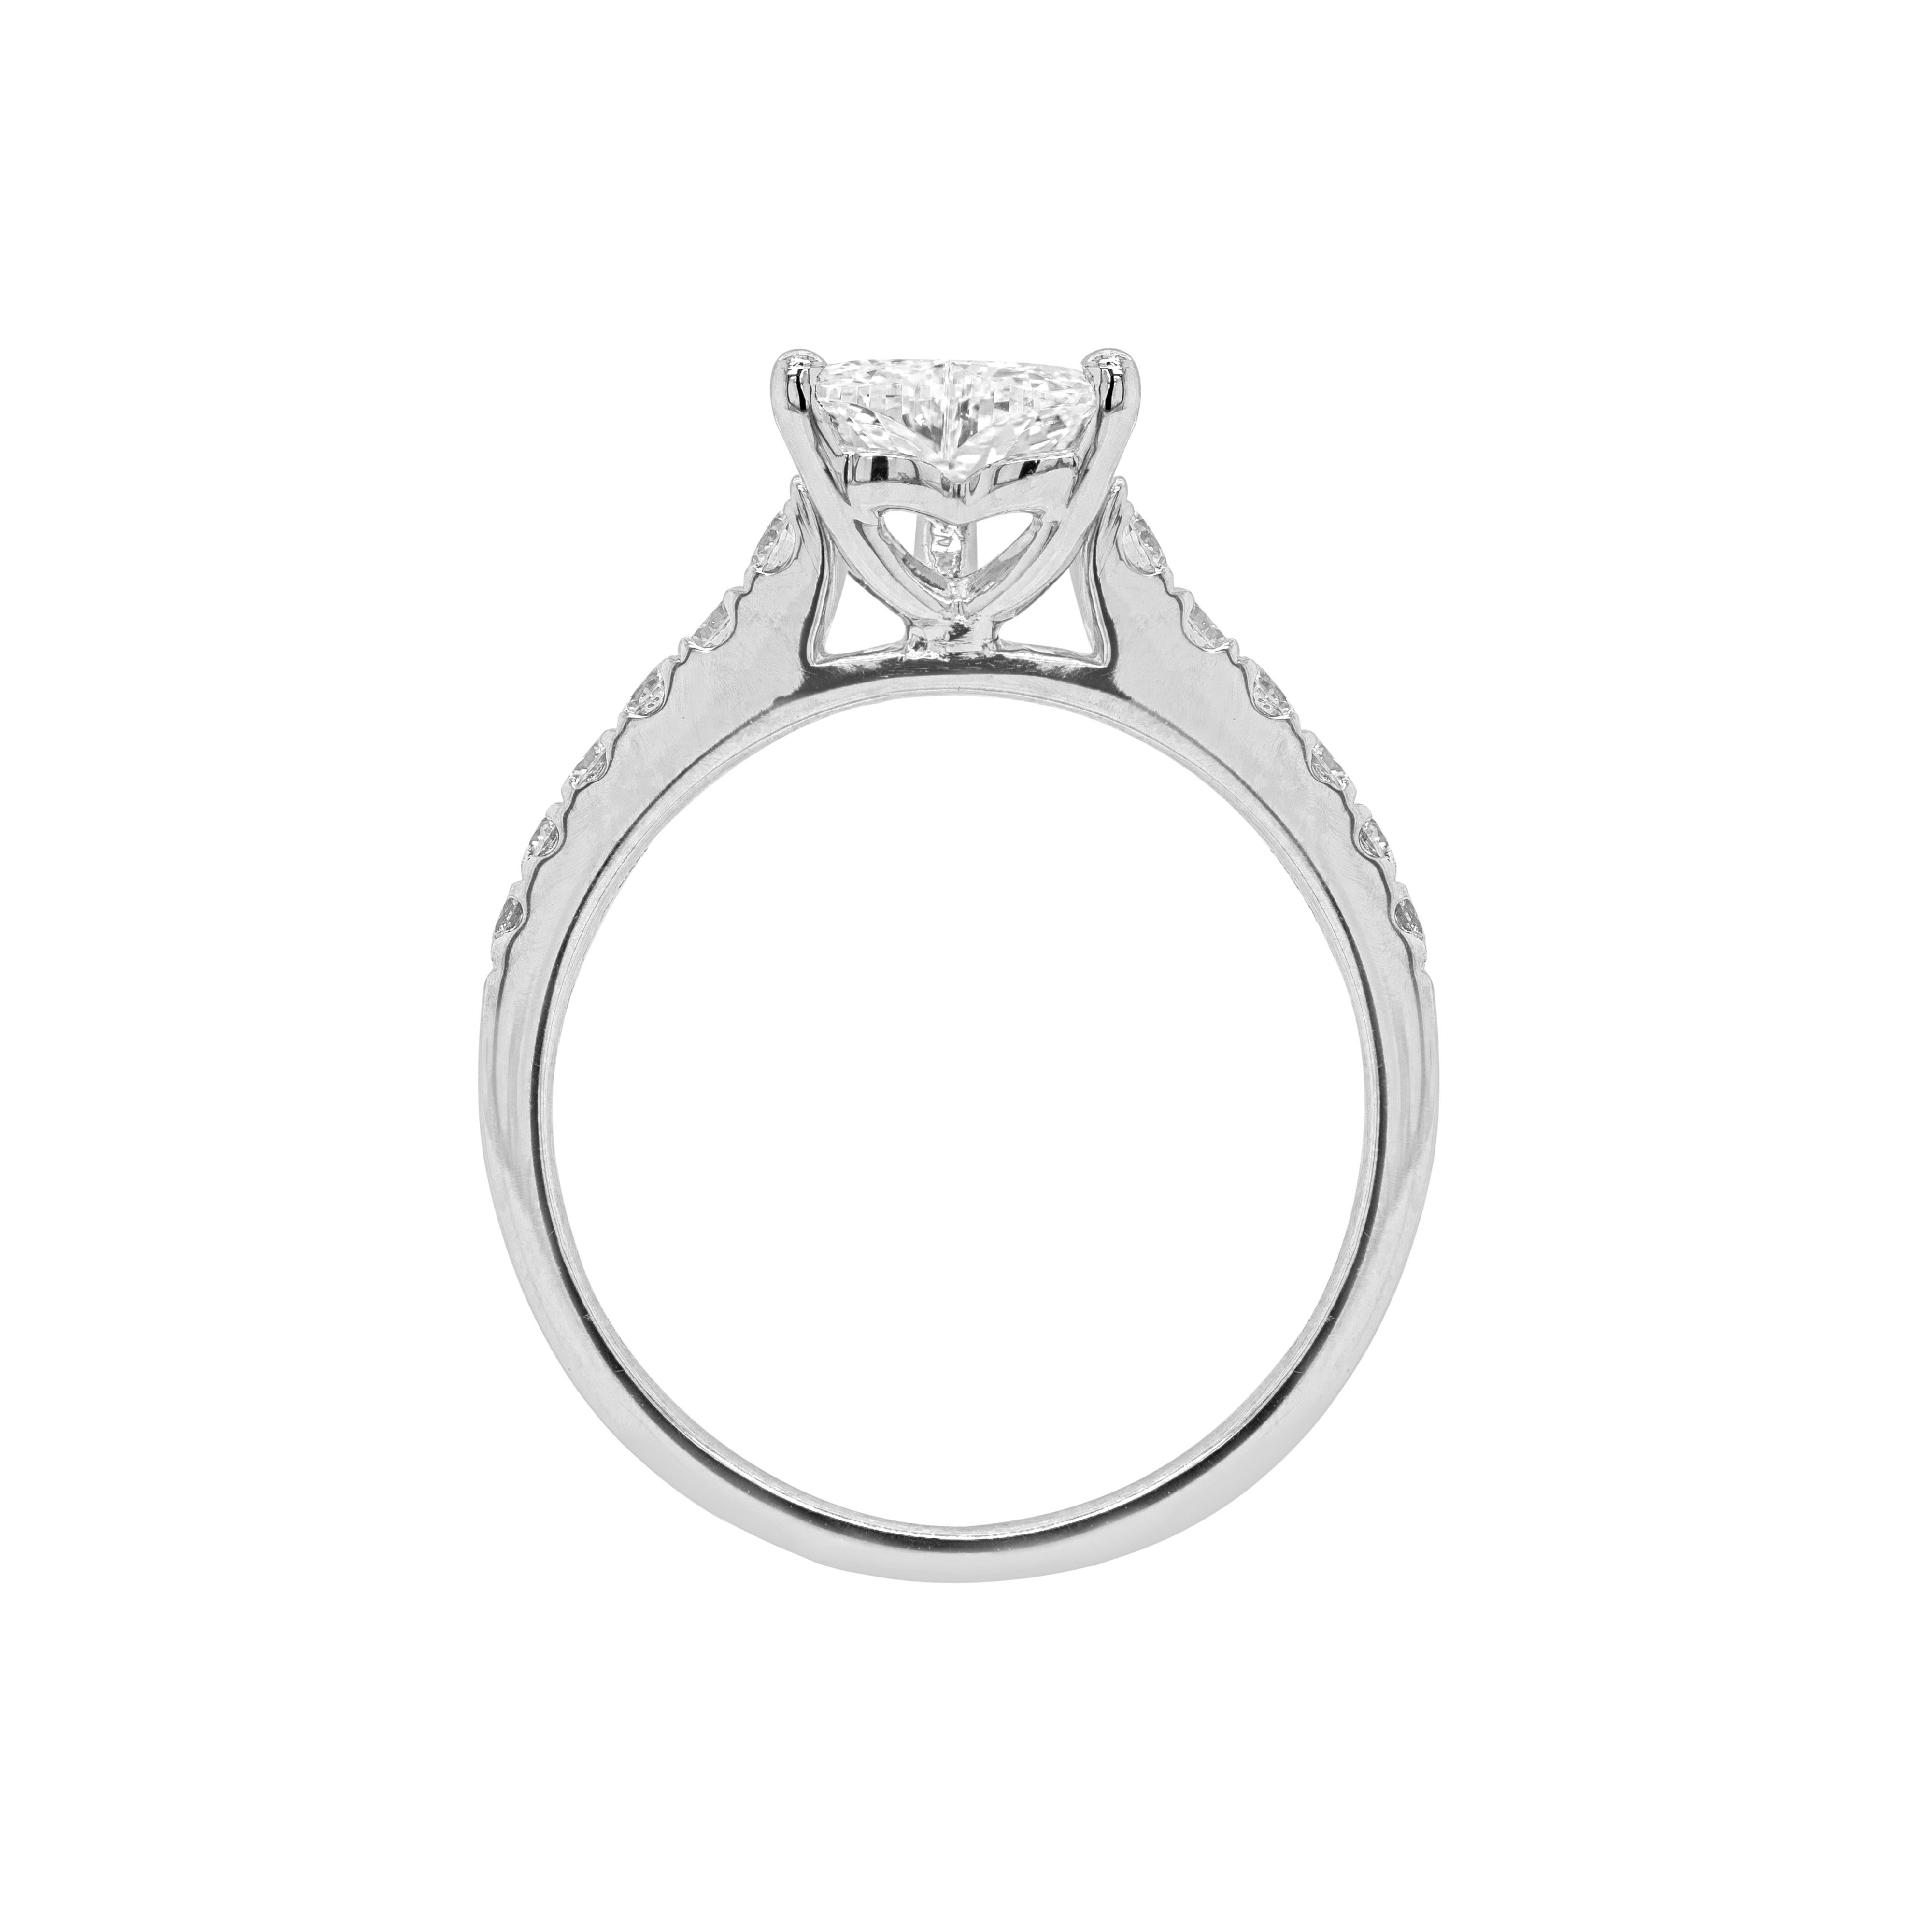 This exquisite engagement ring features a wonderful 1.00ct heart shaped diamond graded I in colour and VVS1 in clarity, mounted in a three claw, open back setting. The beautiful stone is accompanied by six fine round brilliant cut diamonds set on